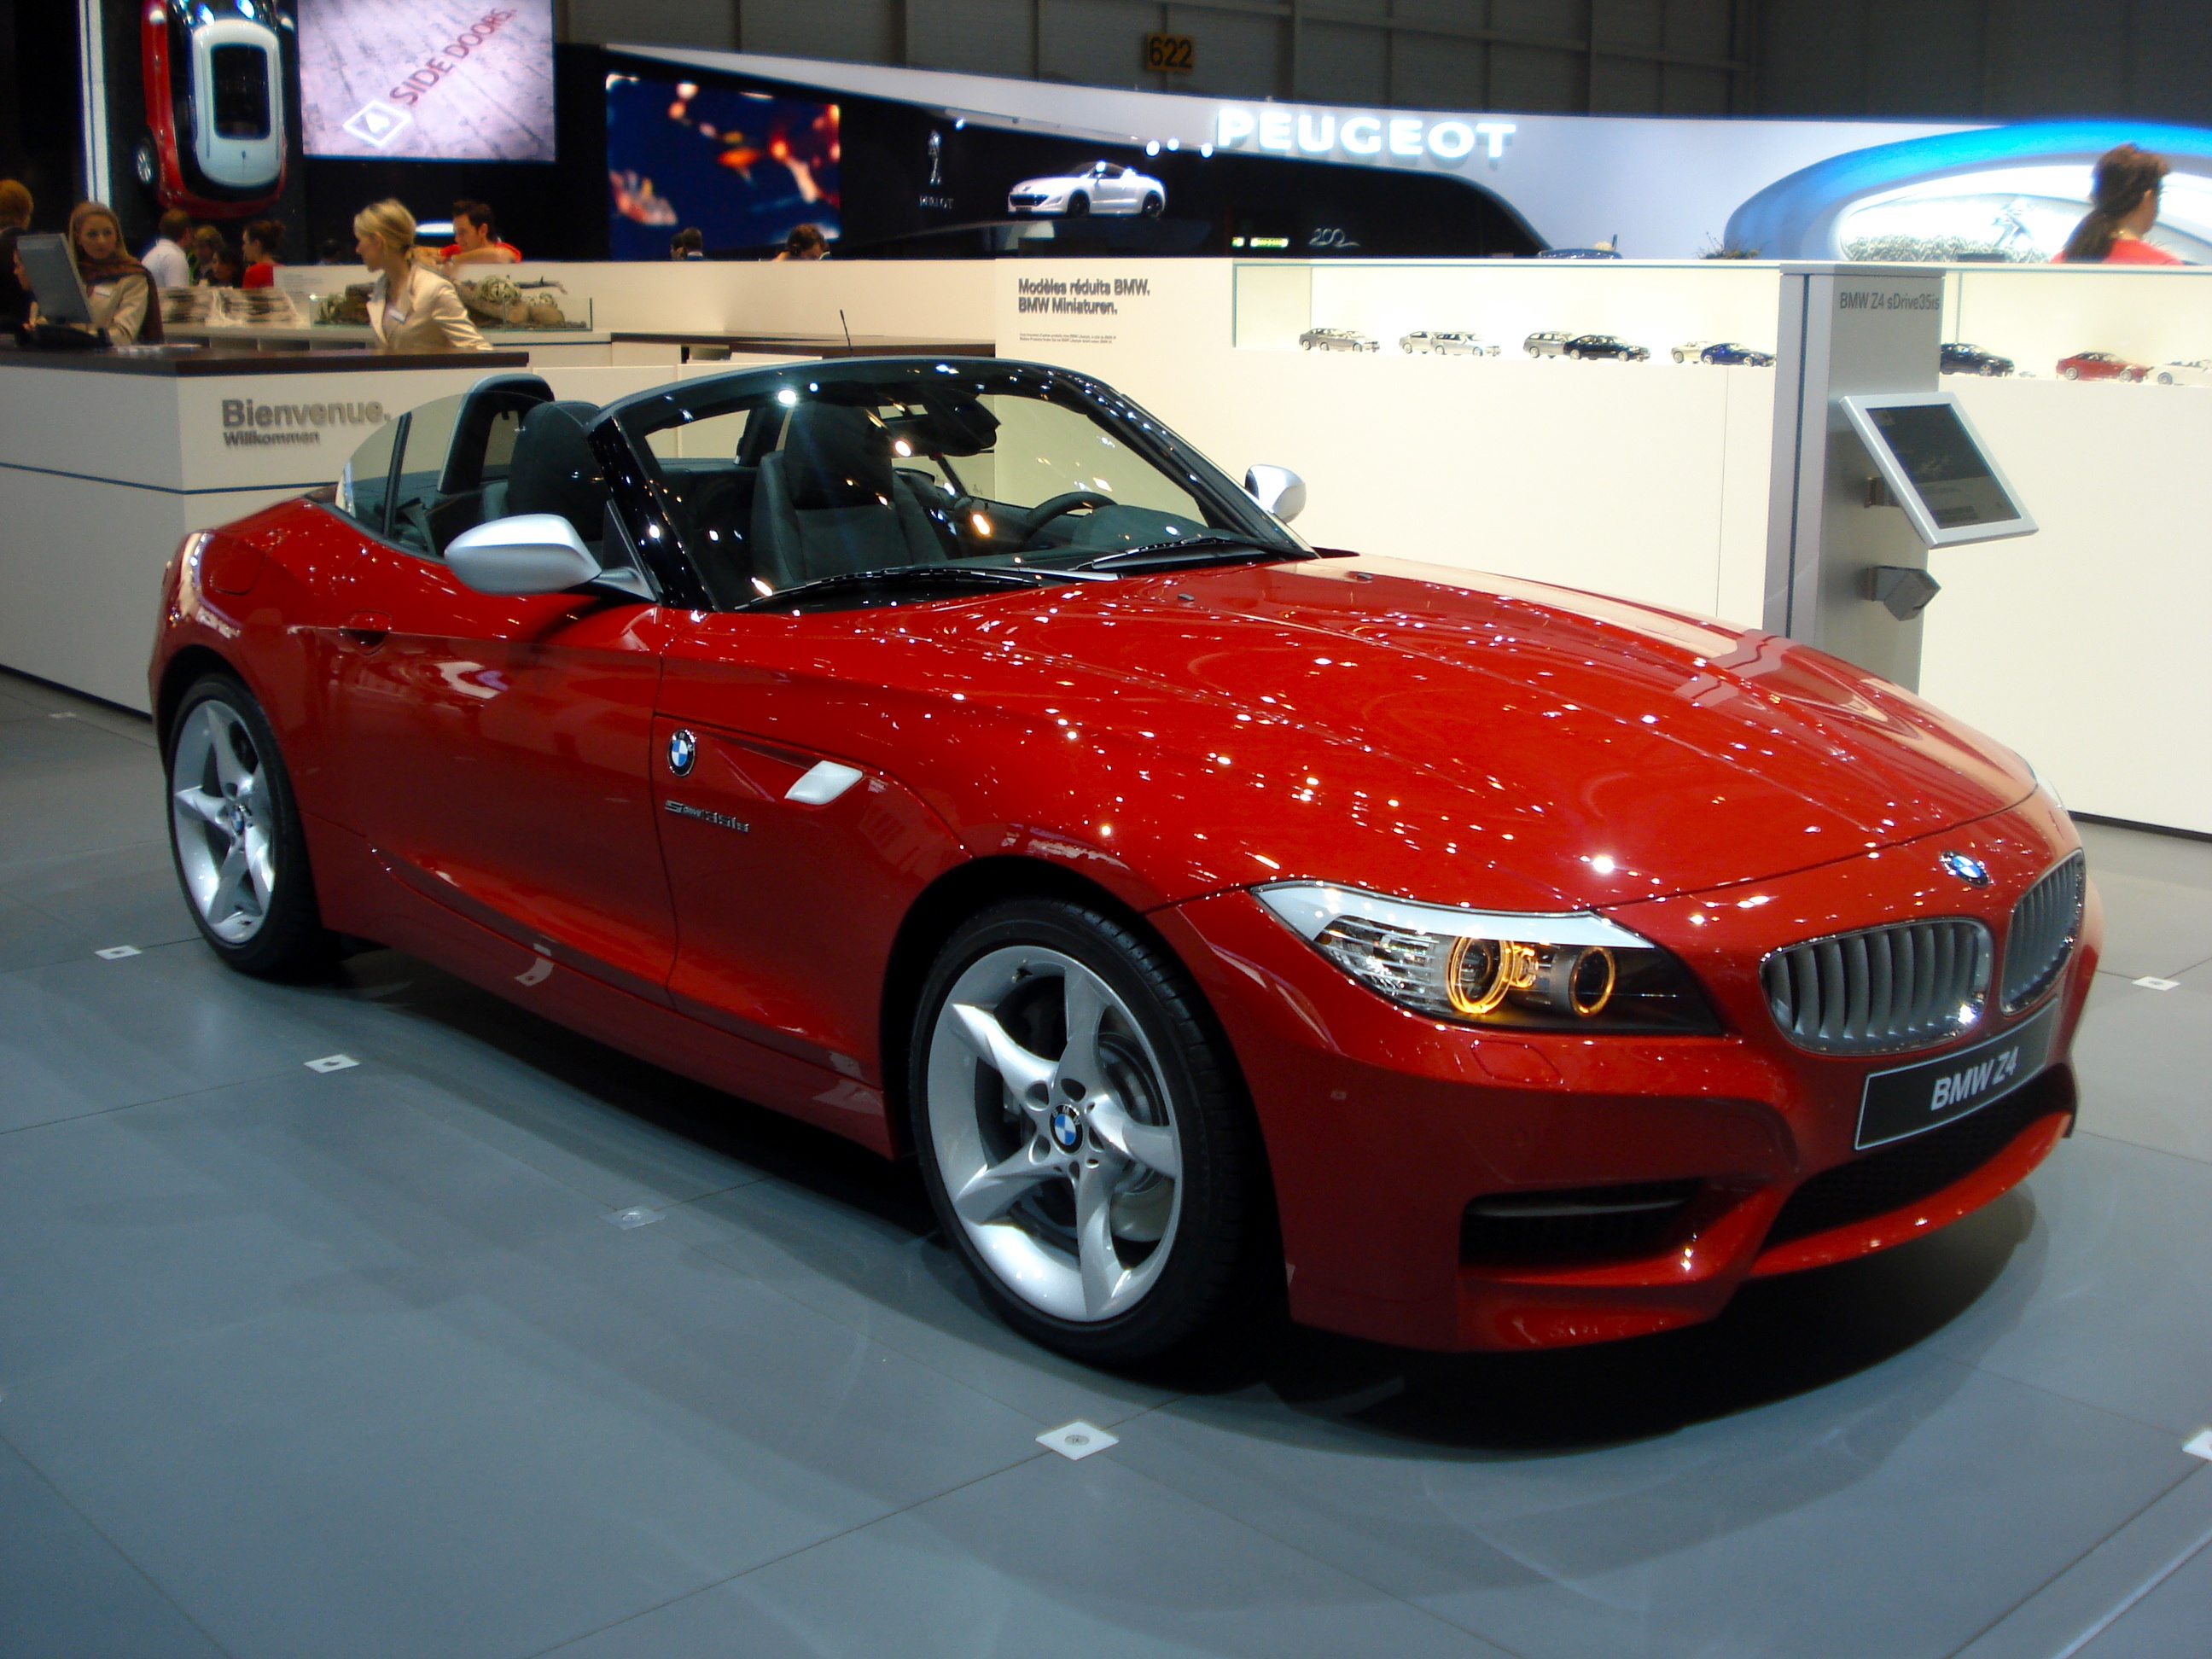 BMW Z4 SDrive 35is | Flickr - Photo Sharing!